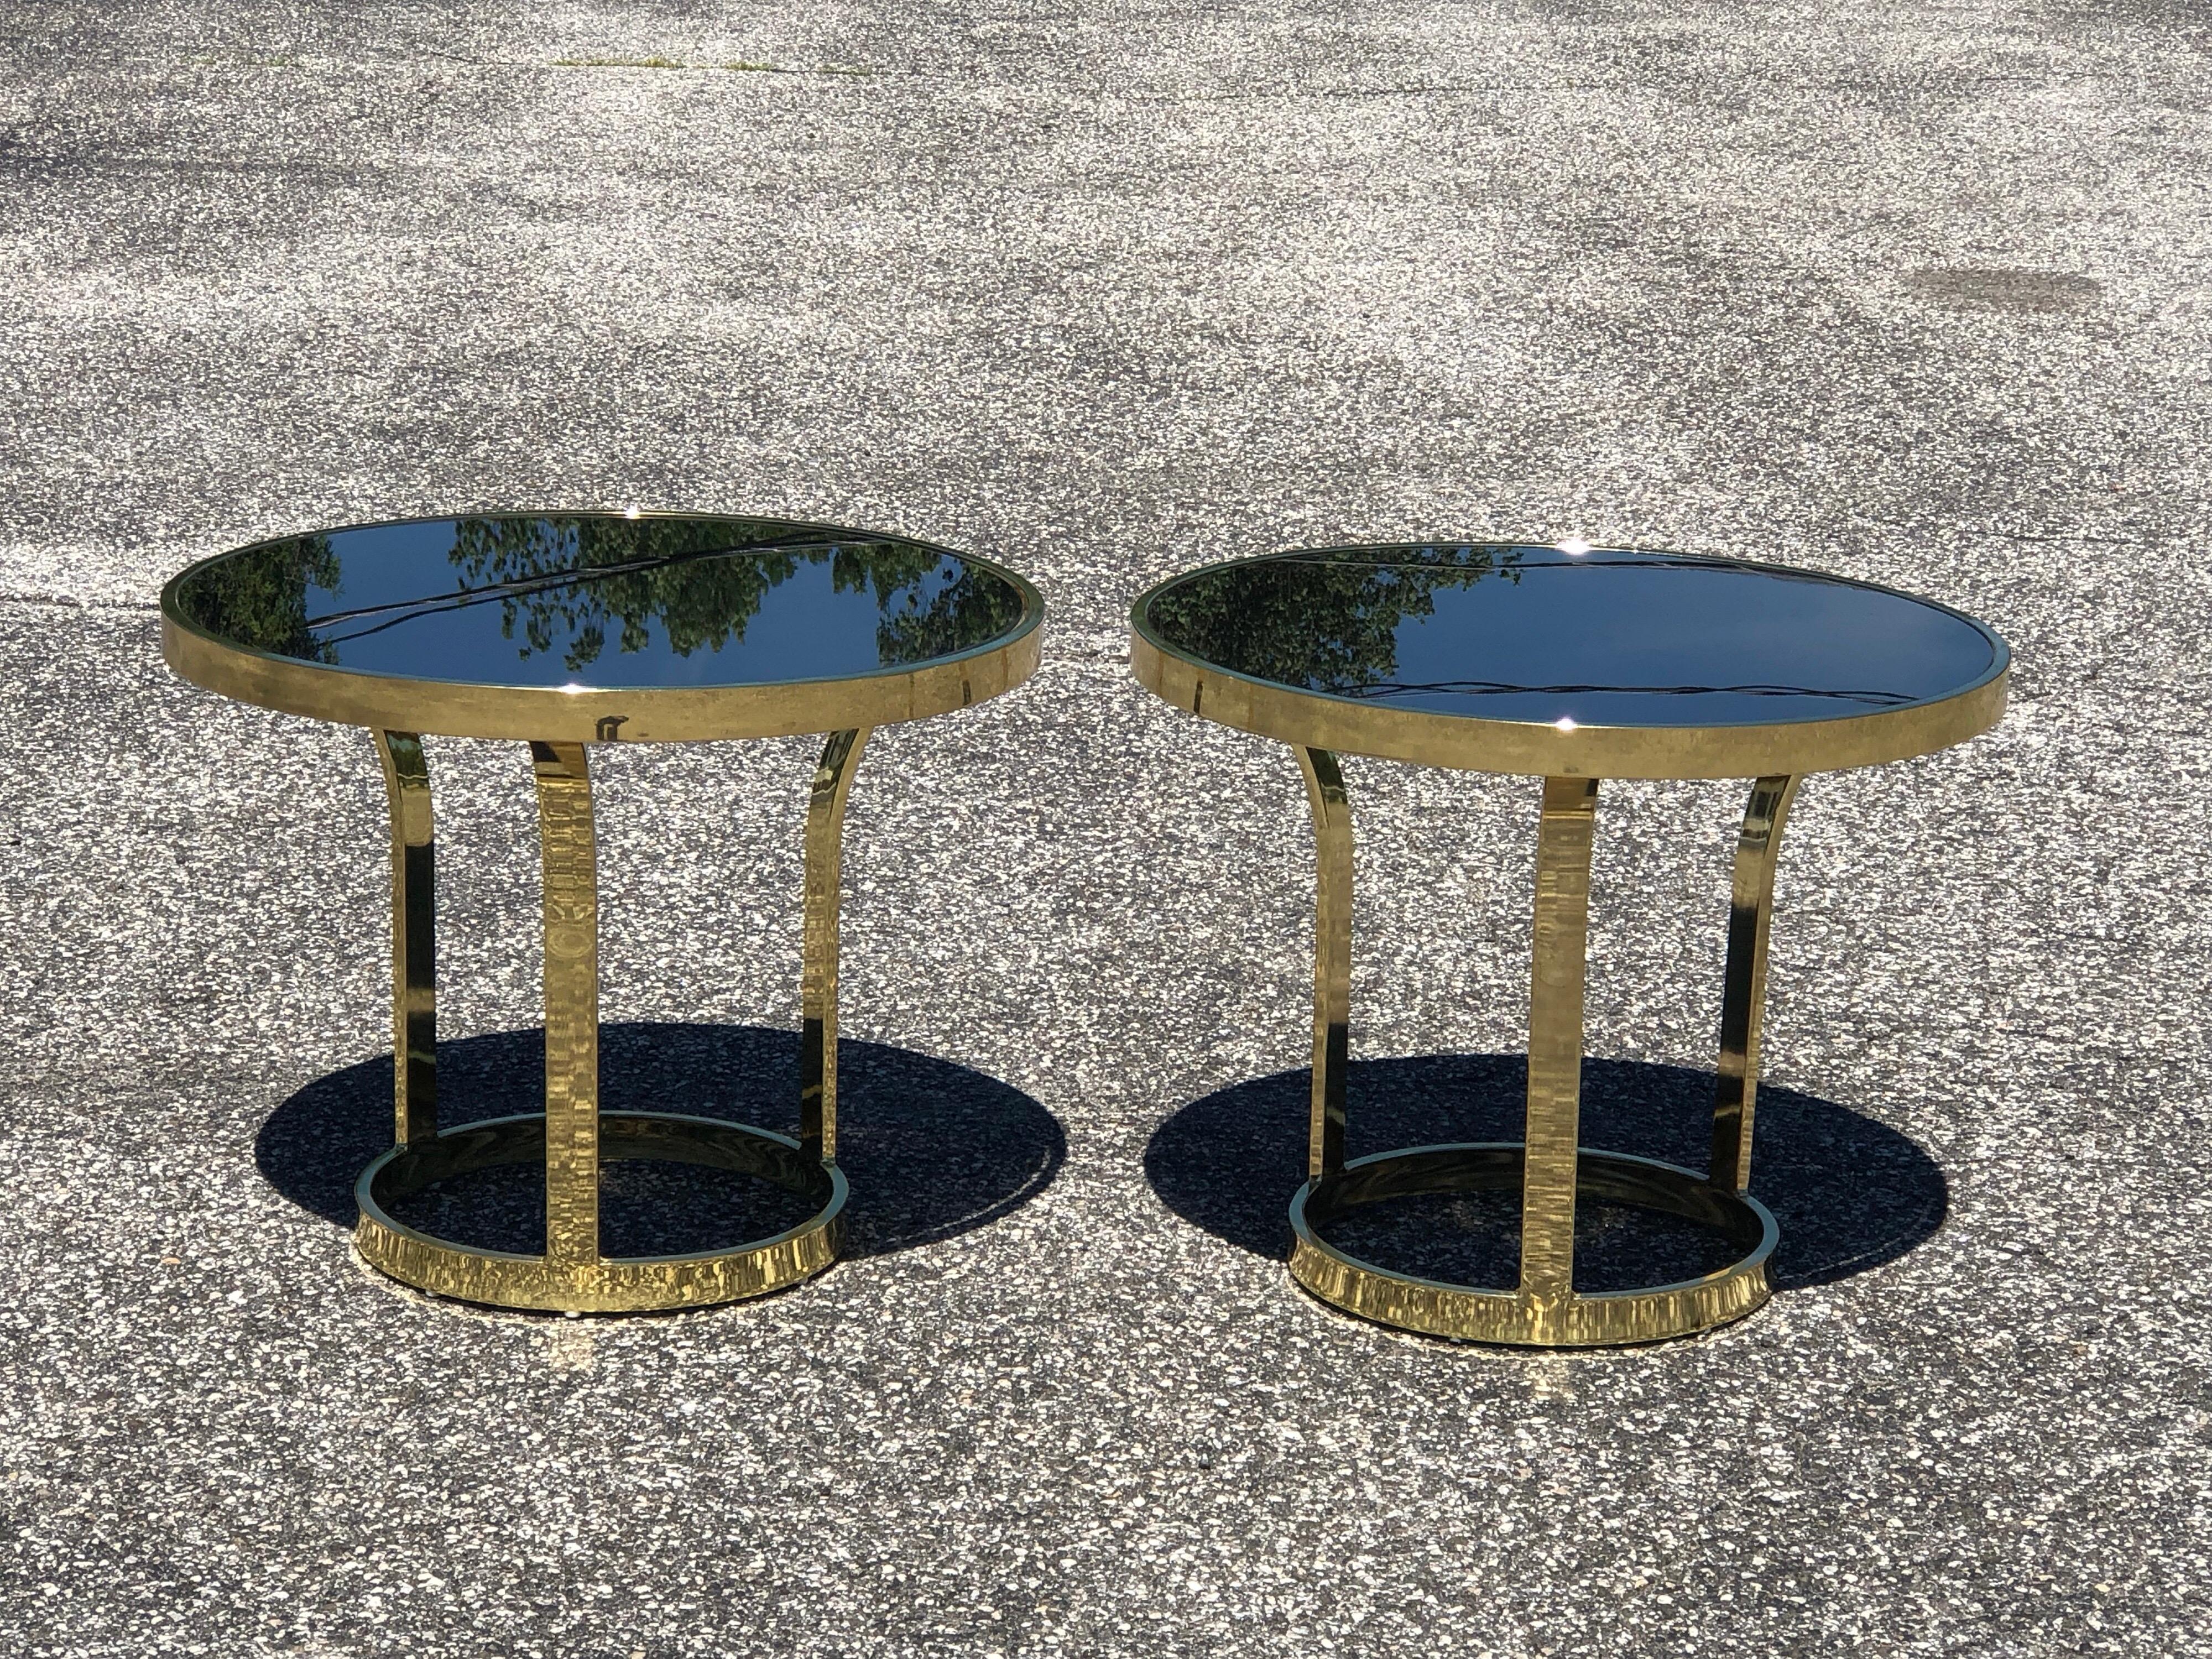 Adjustable Design Institute of America Brass and Black Glass Coffee Table 6